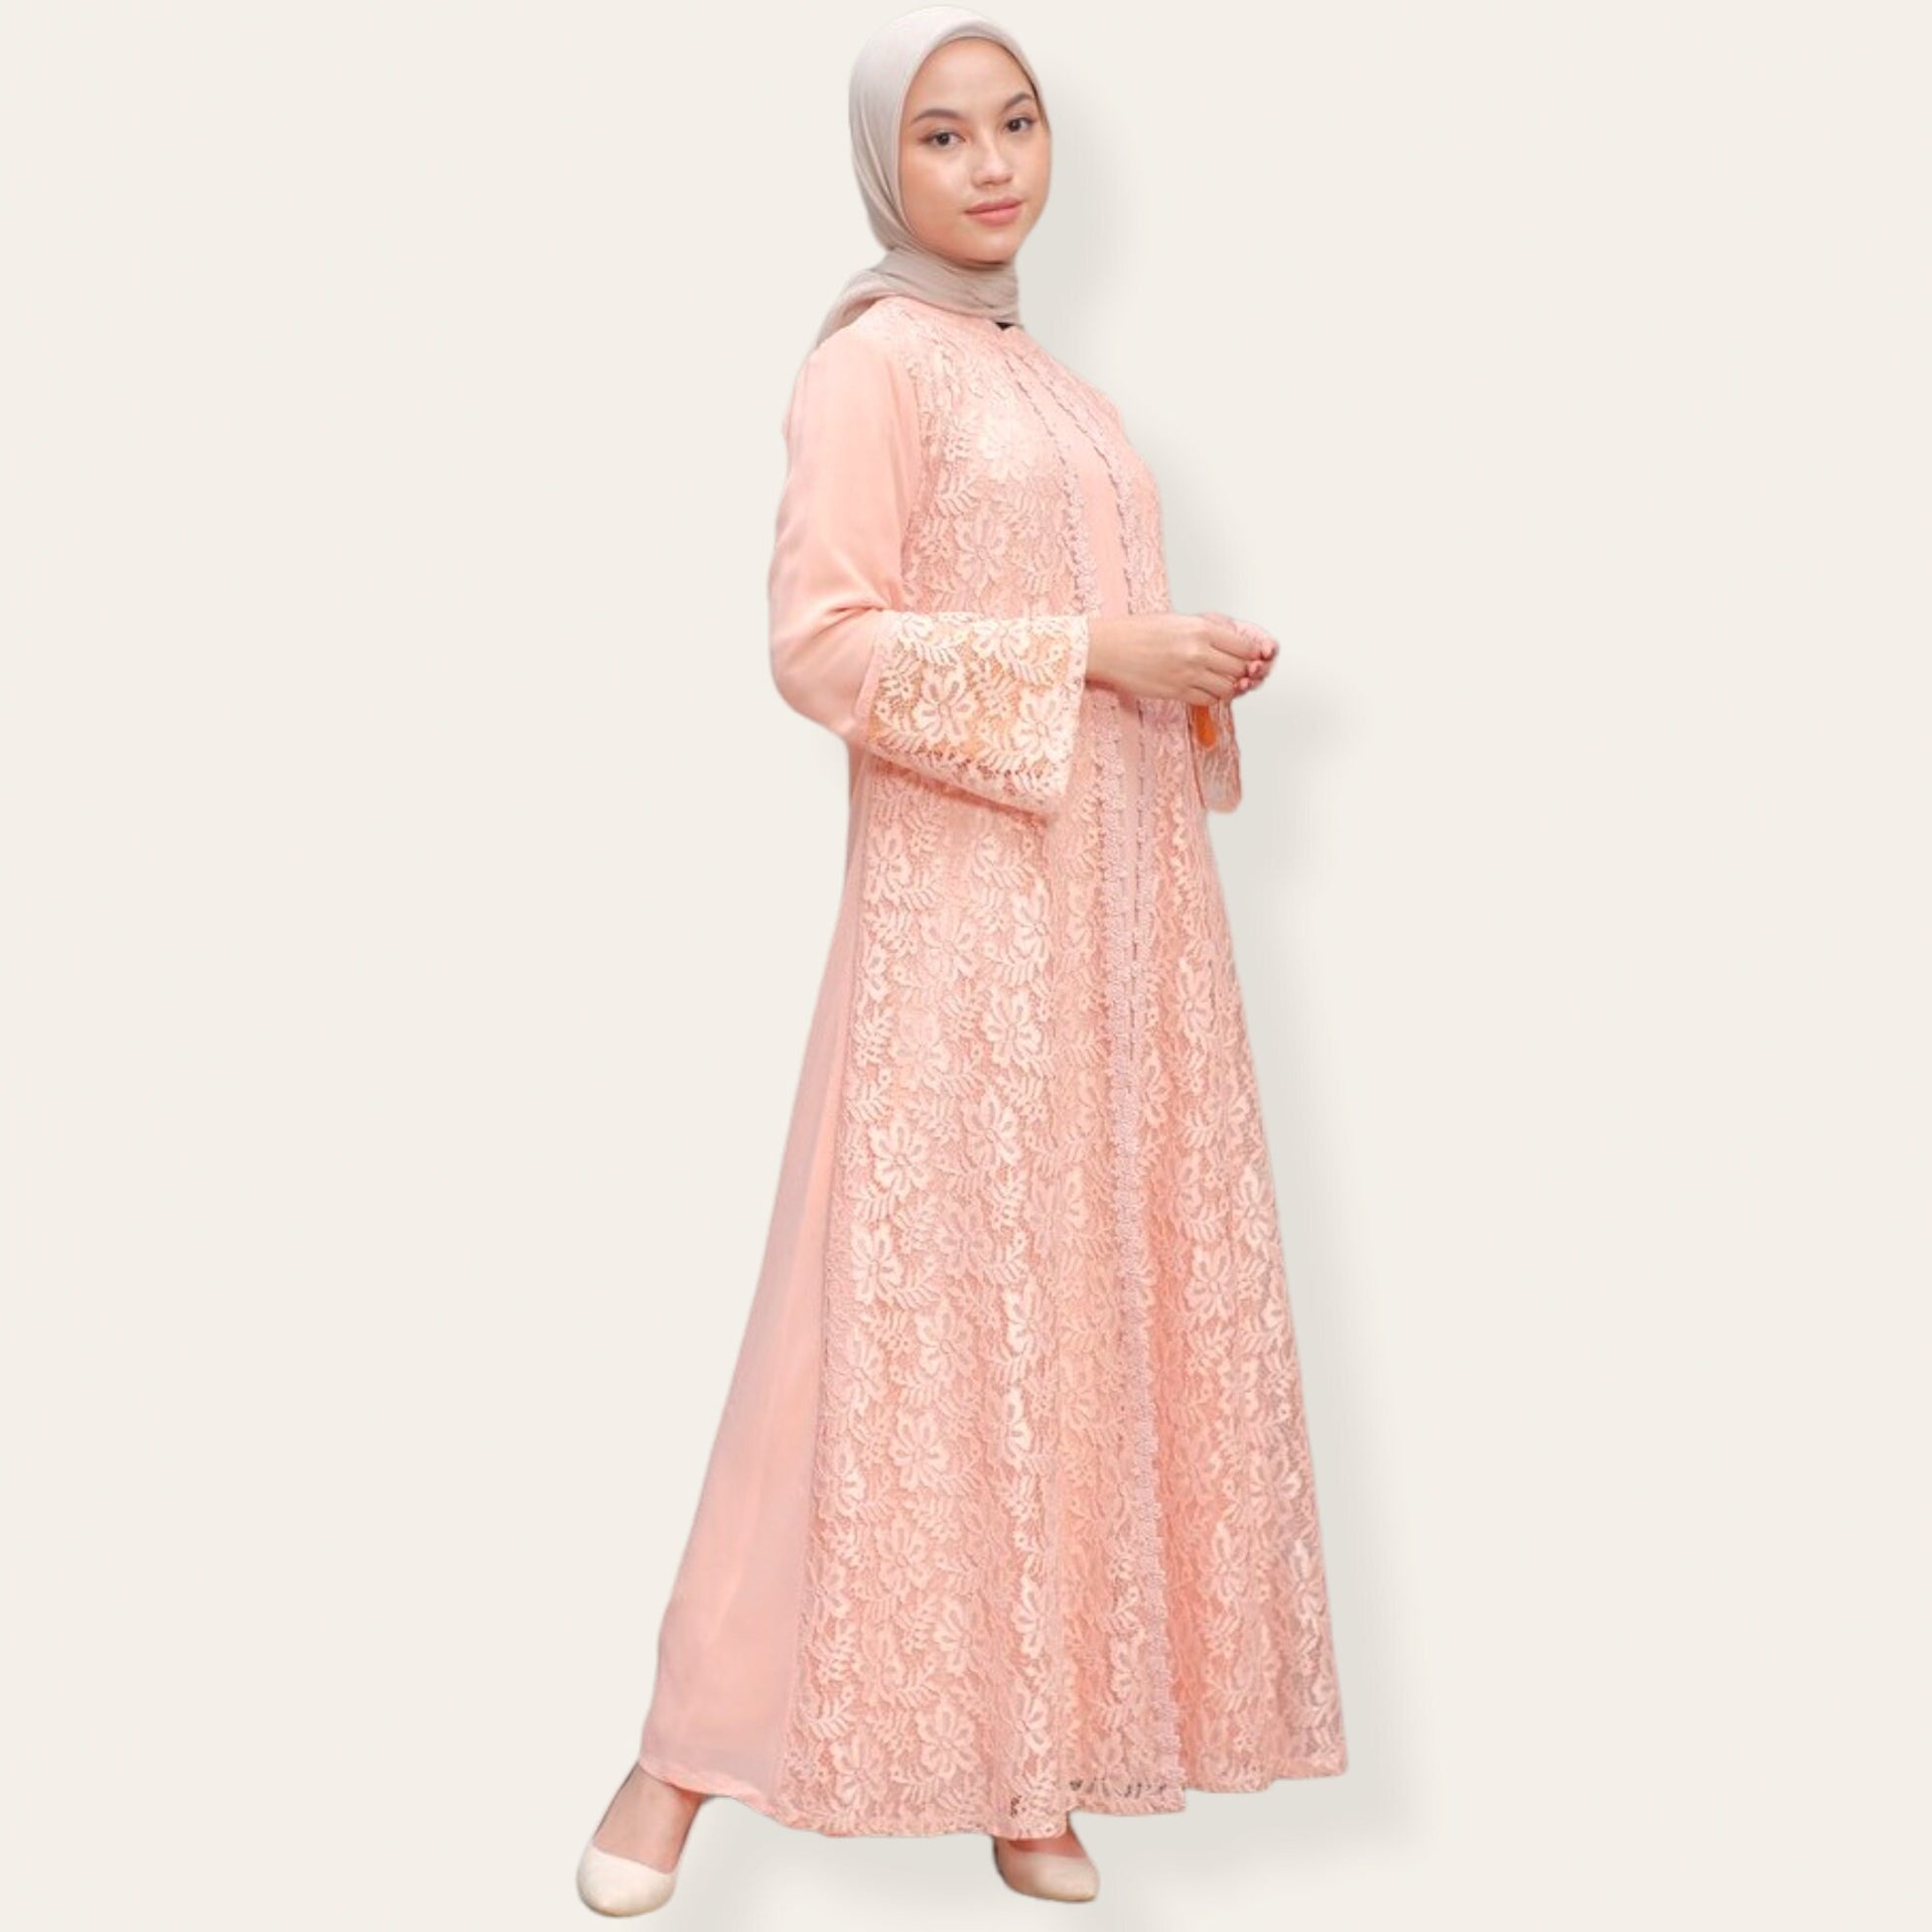 Peach abaya dress with brocade feature on top and zipper at back